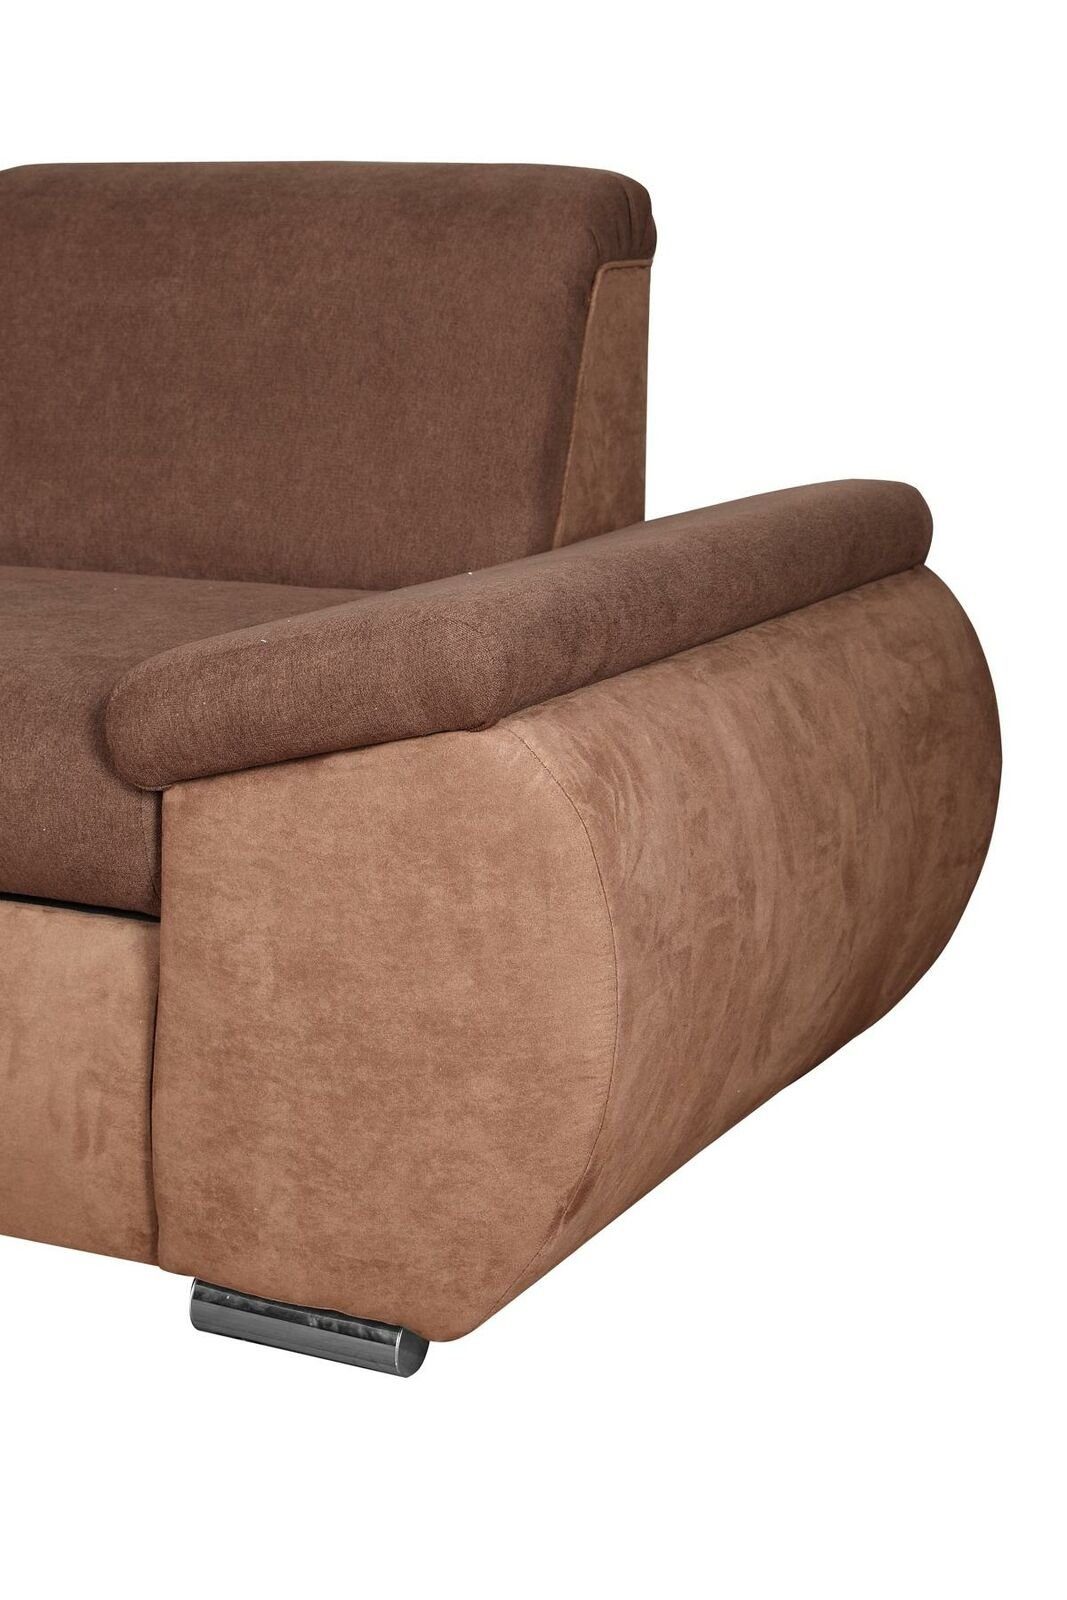 L-Form Made Ecksofa in Bettfunktion Sofa Europe Sofa Couch, Stoff Design Braunes JVmoebel mit Couch